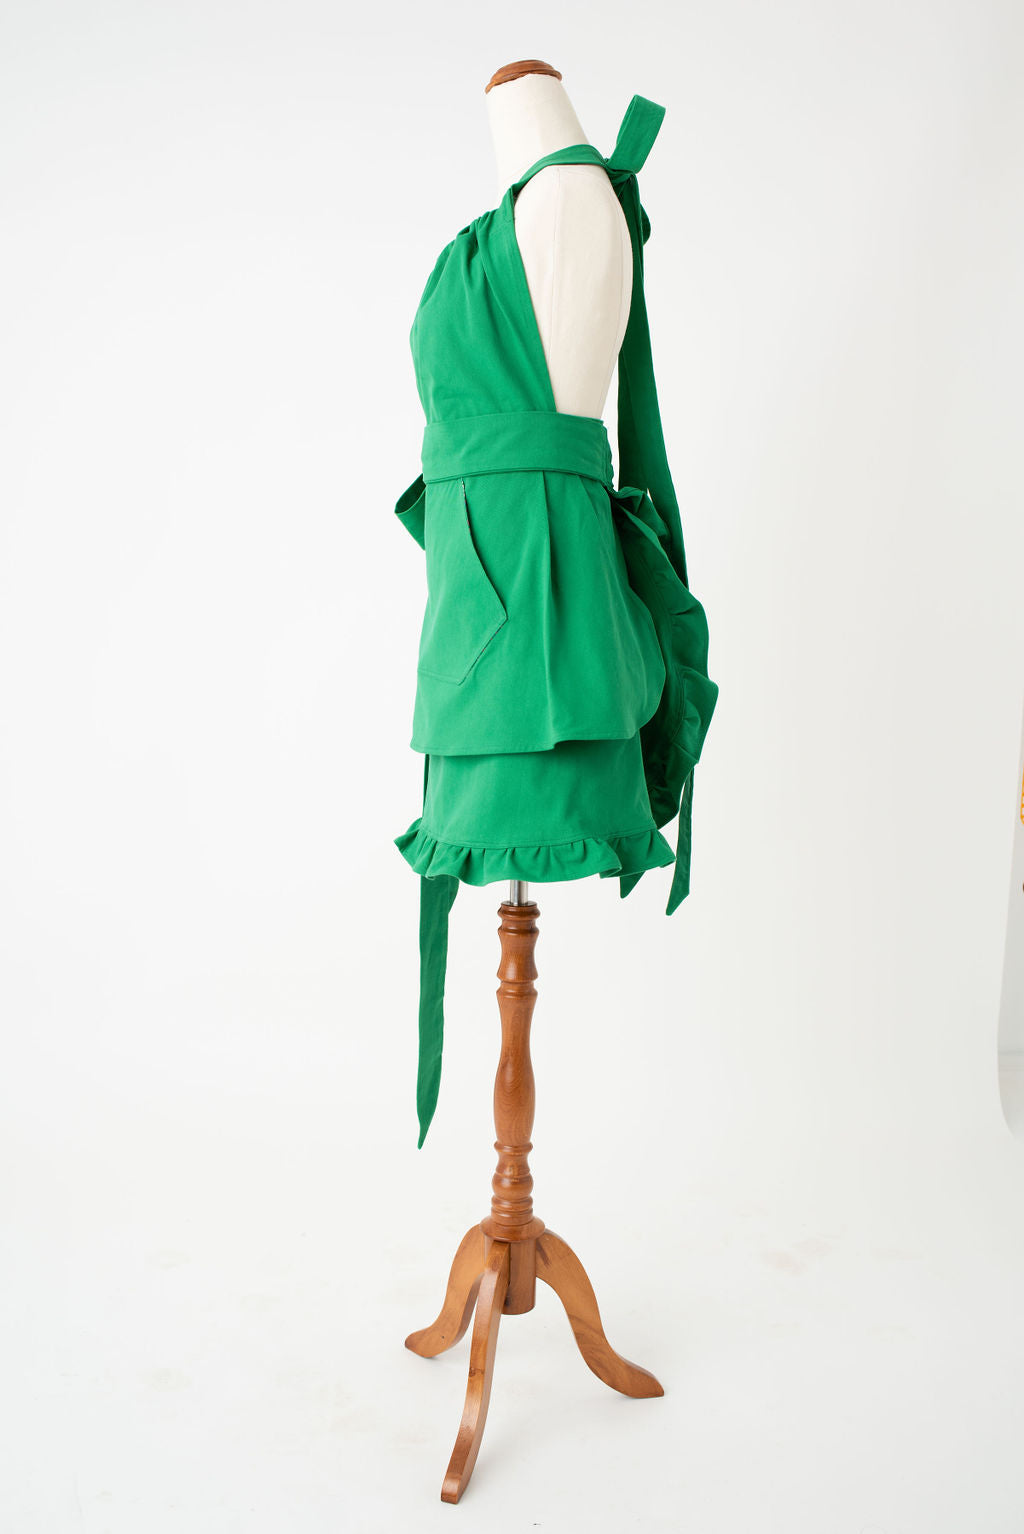 Cute Christmas Apron in green by Pretty Made - side ruffles